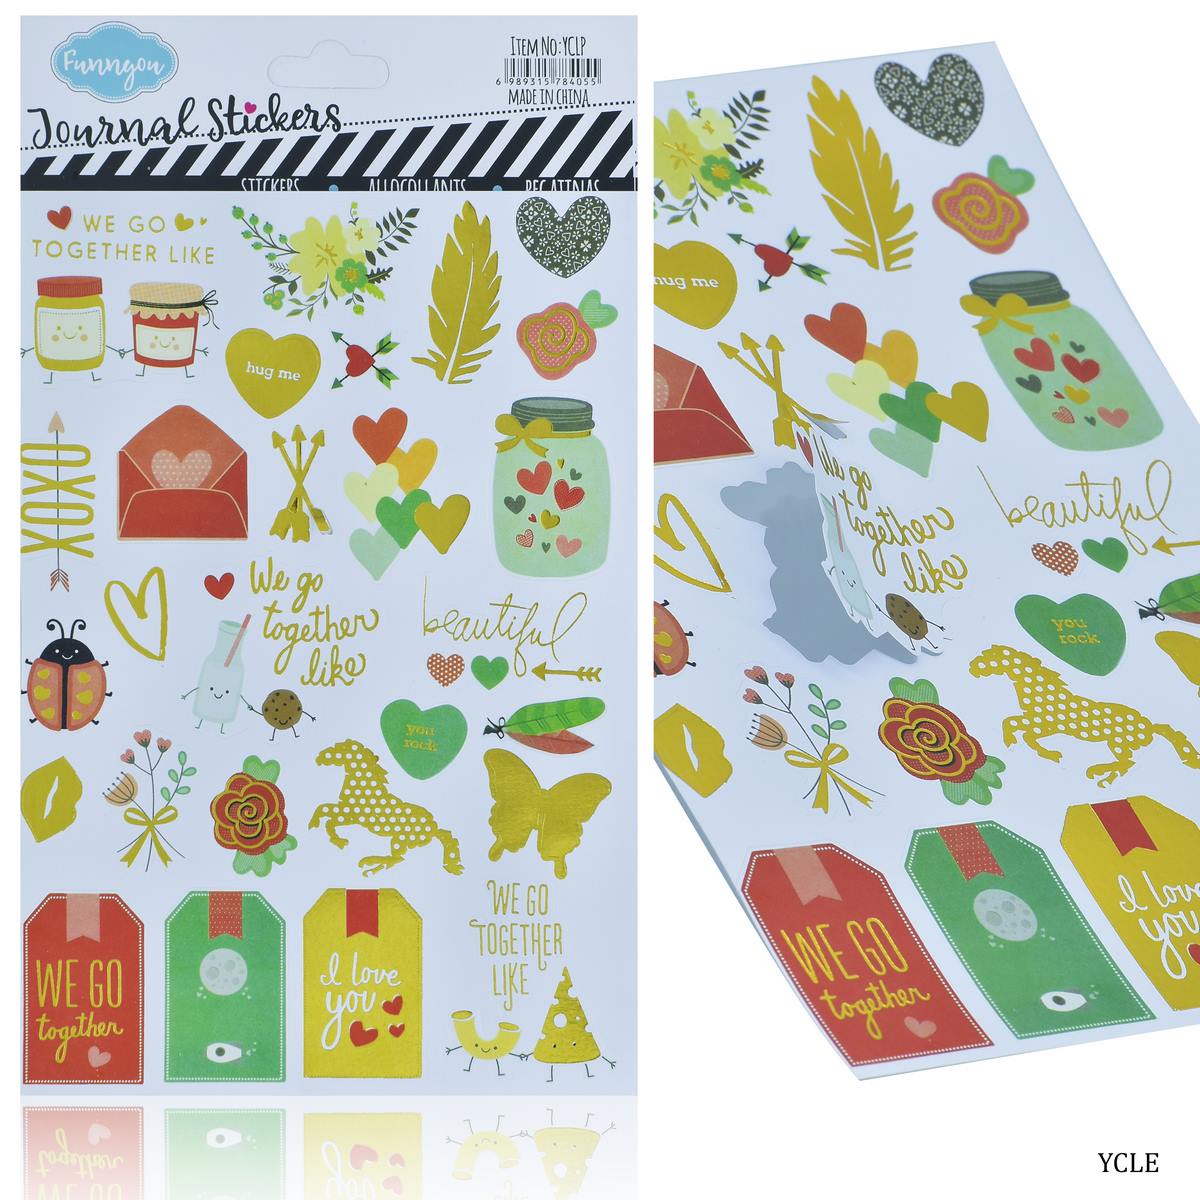 Journal Stickers YCLE